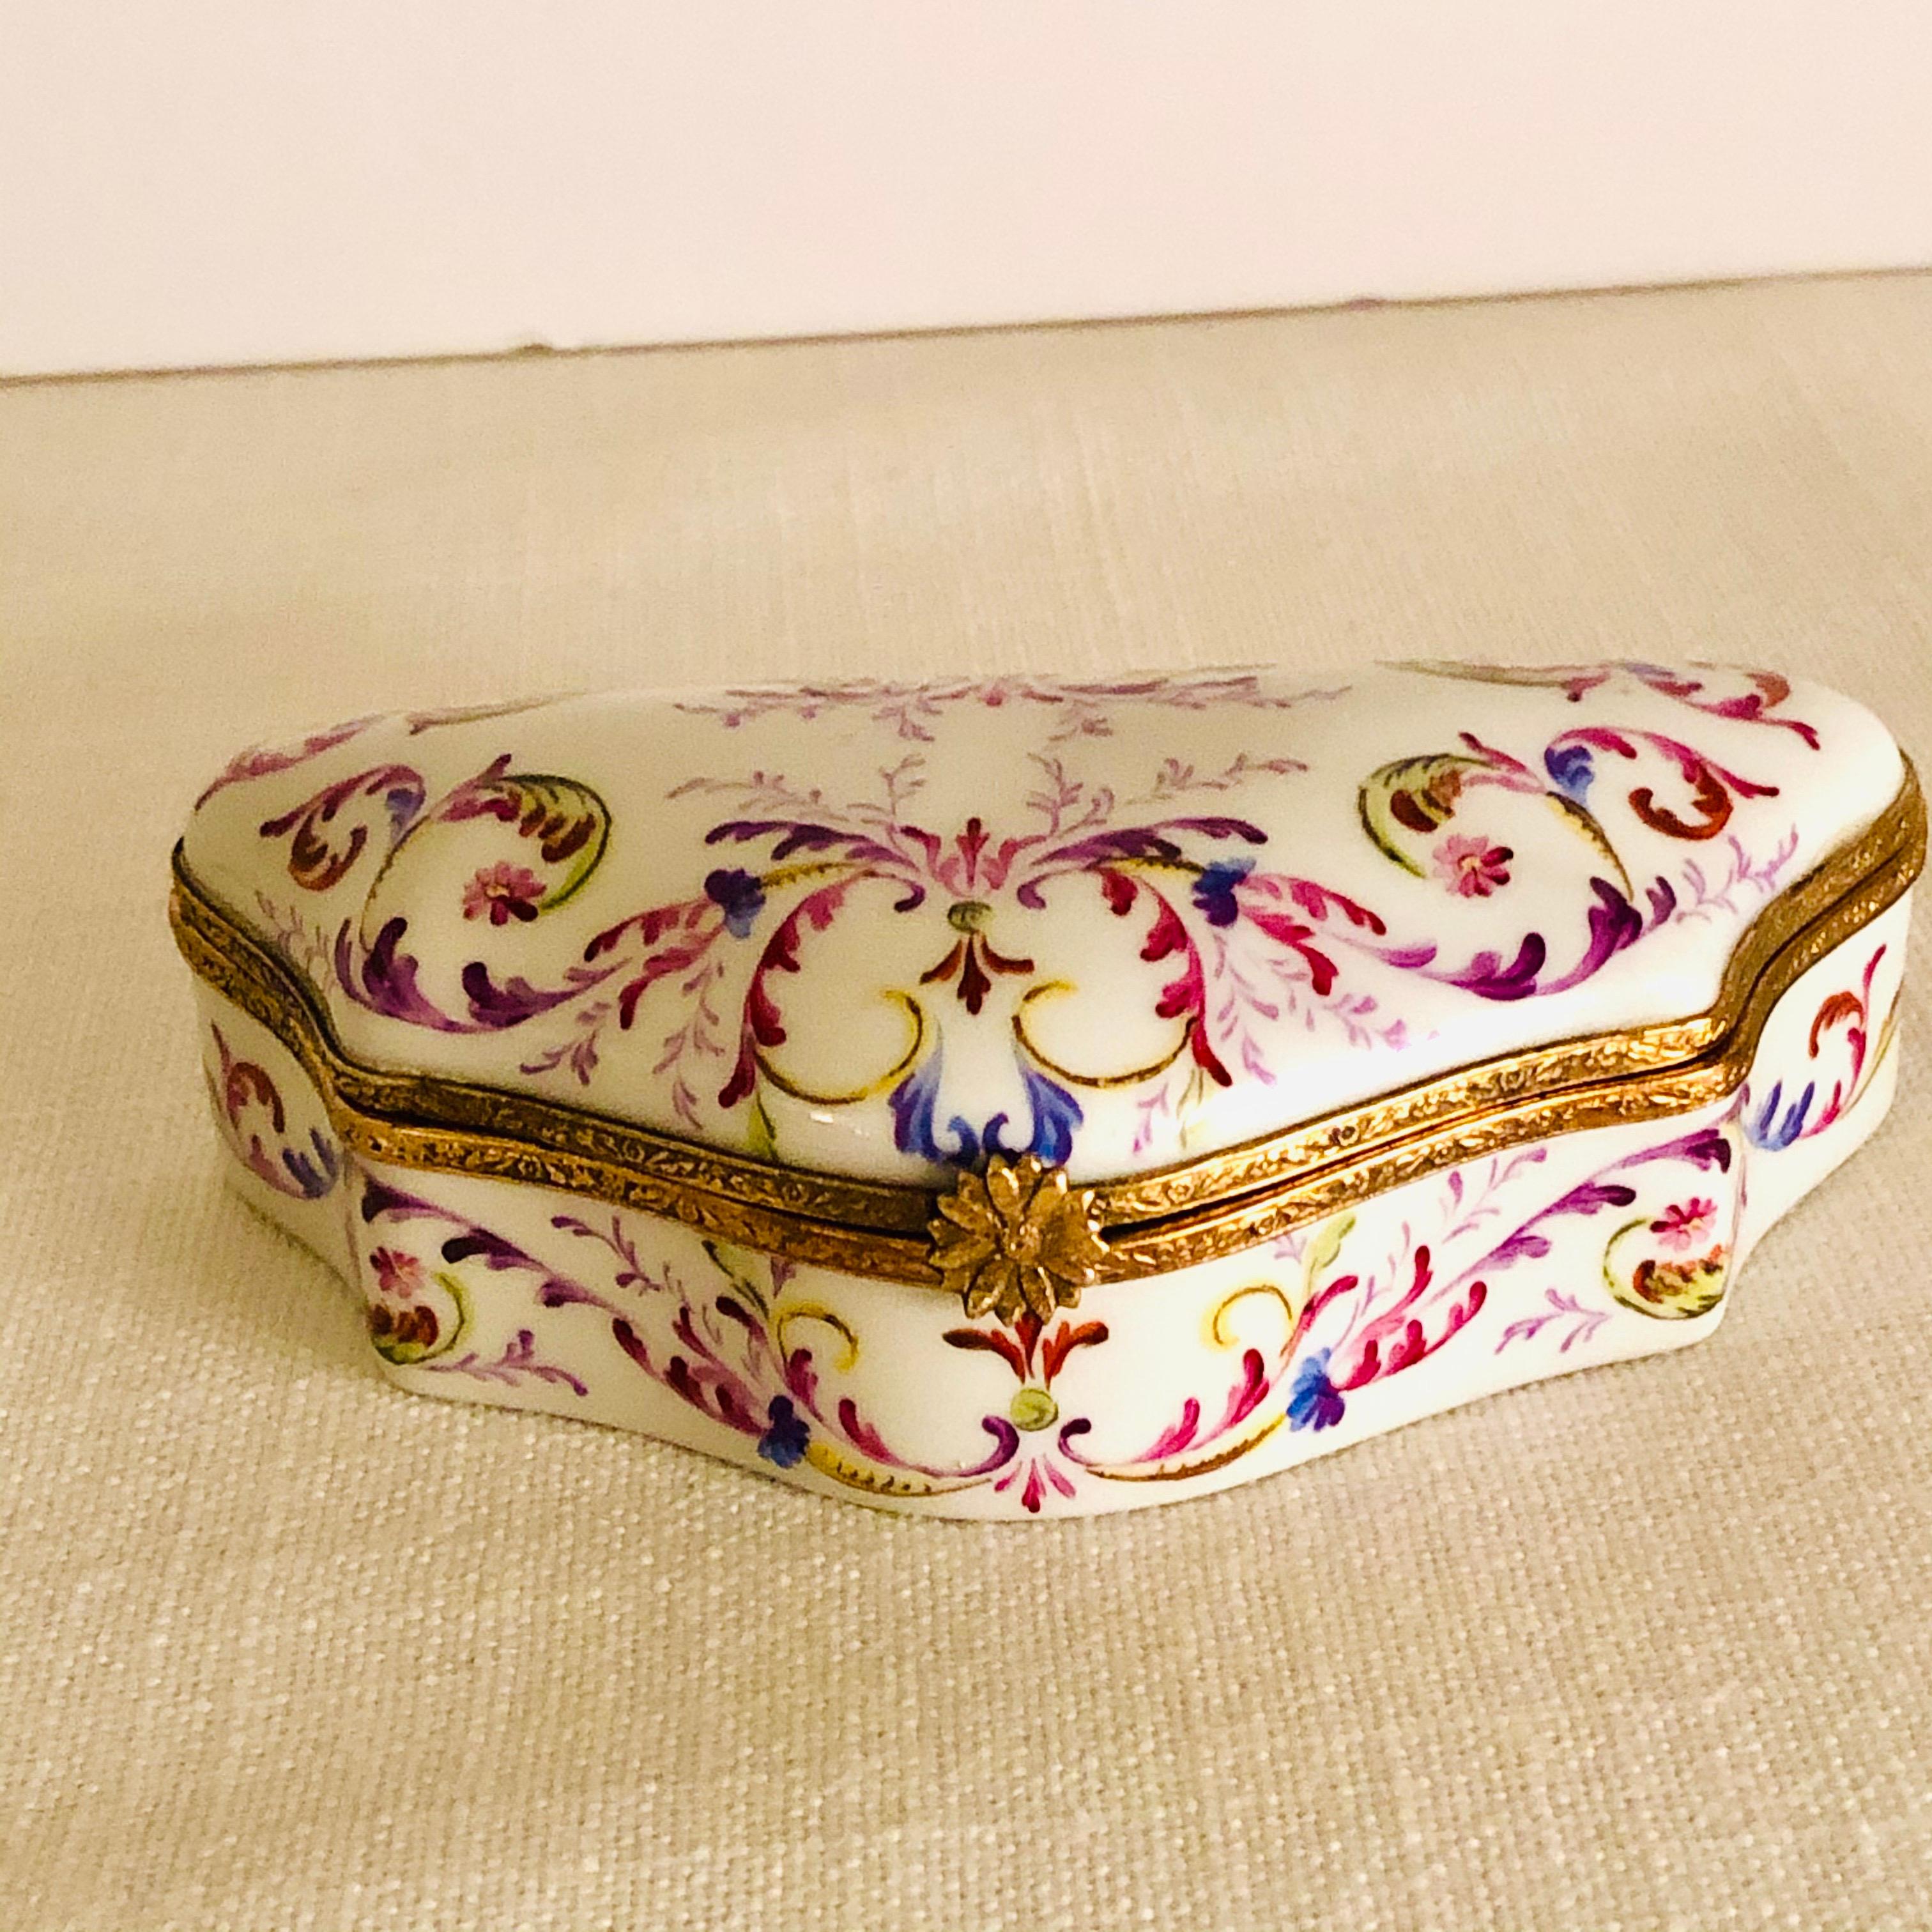 Le Tallec Porcelain Box Painted with Elaborate Design of Many Colors and Flowers 1